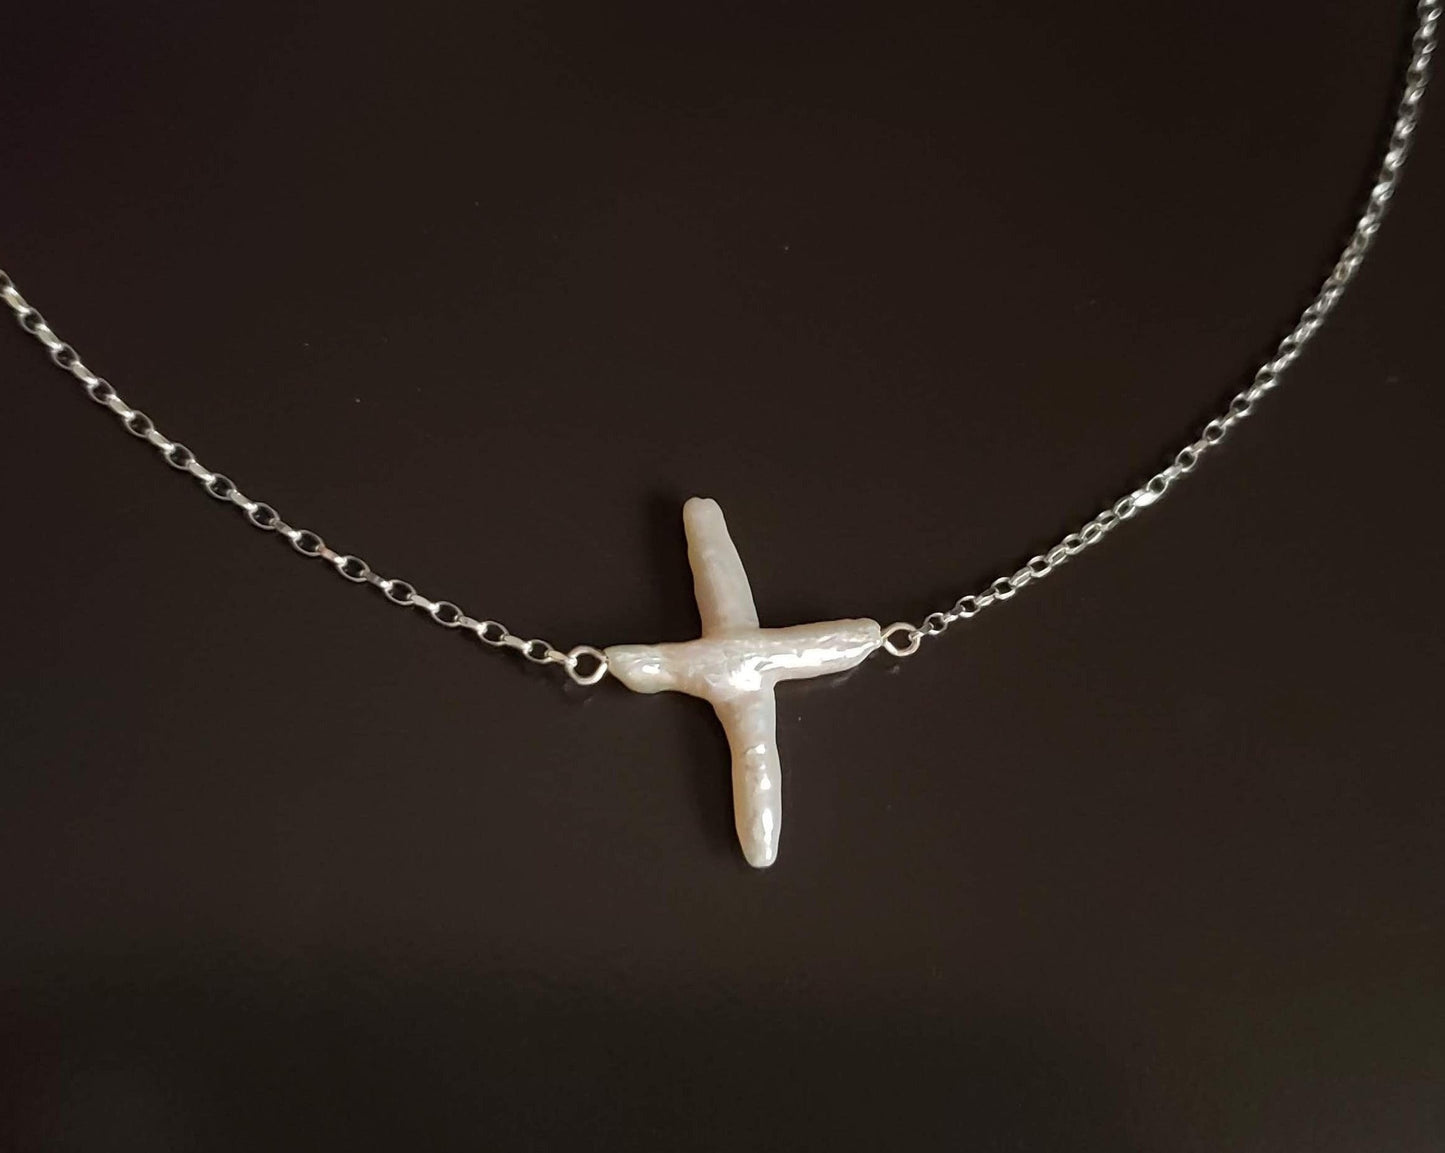 Floating Large Baroque Pearl Cross Necklace, White Baroque Freshwater Cultured Pearl Cross on Sterling Silver Chain. 